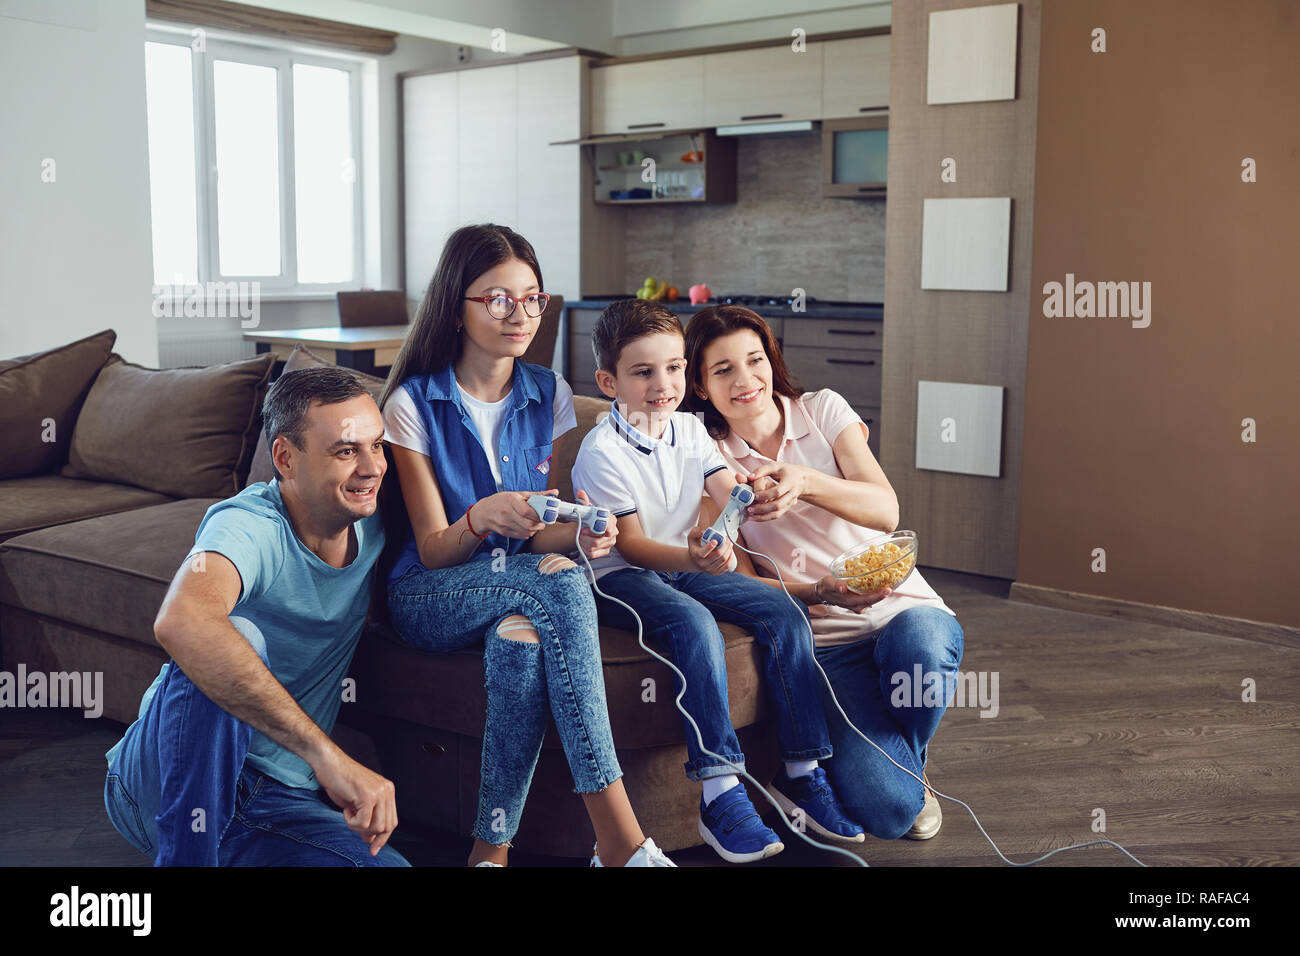 A cheerful family is playing video games in the house. Stock Photo